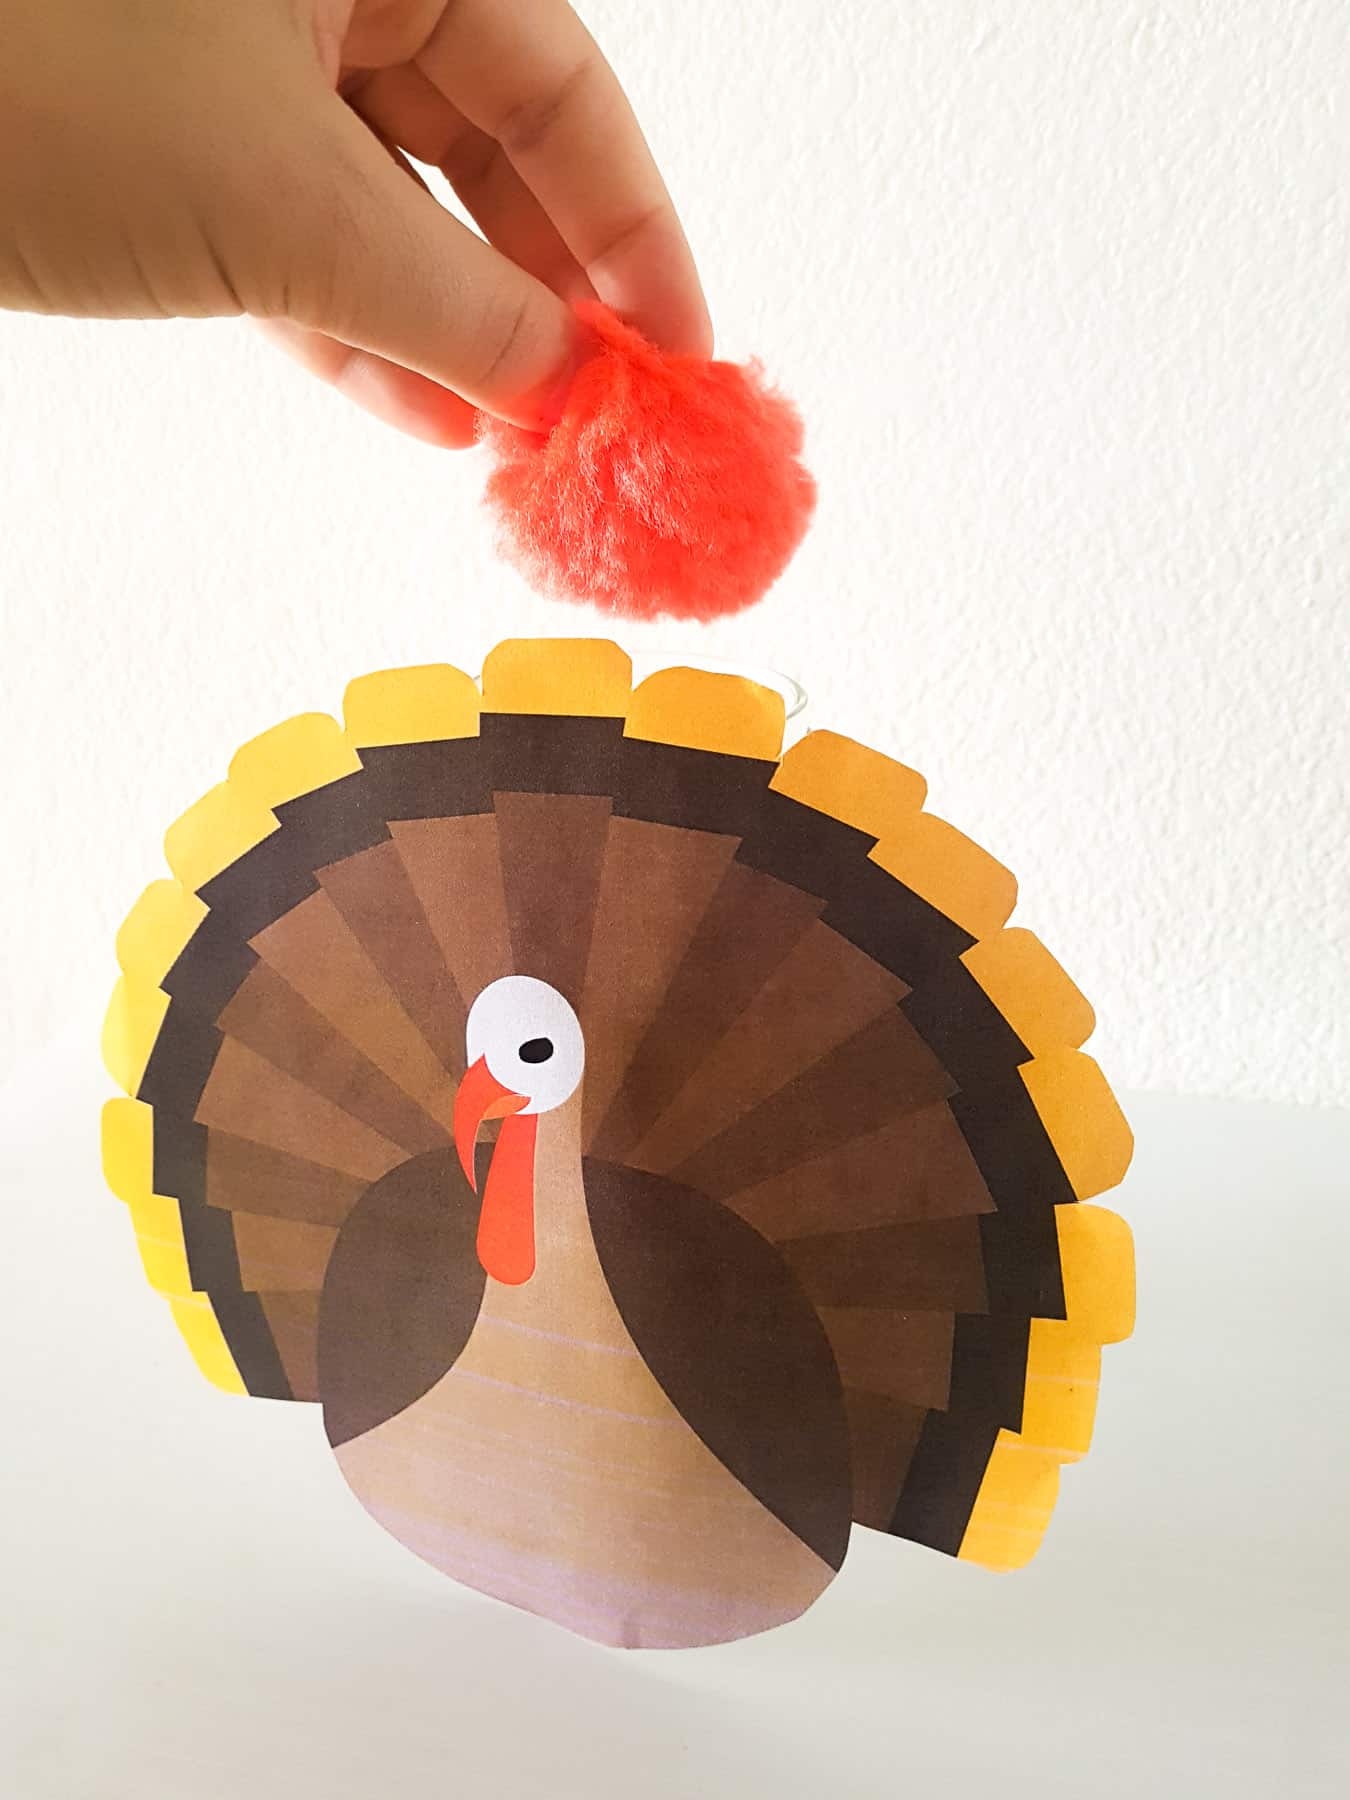 hand putting pompom into a jar with a paper turkey glued to it - demonstrating a toddler activity